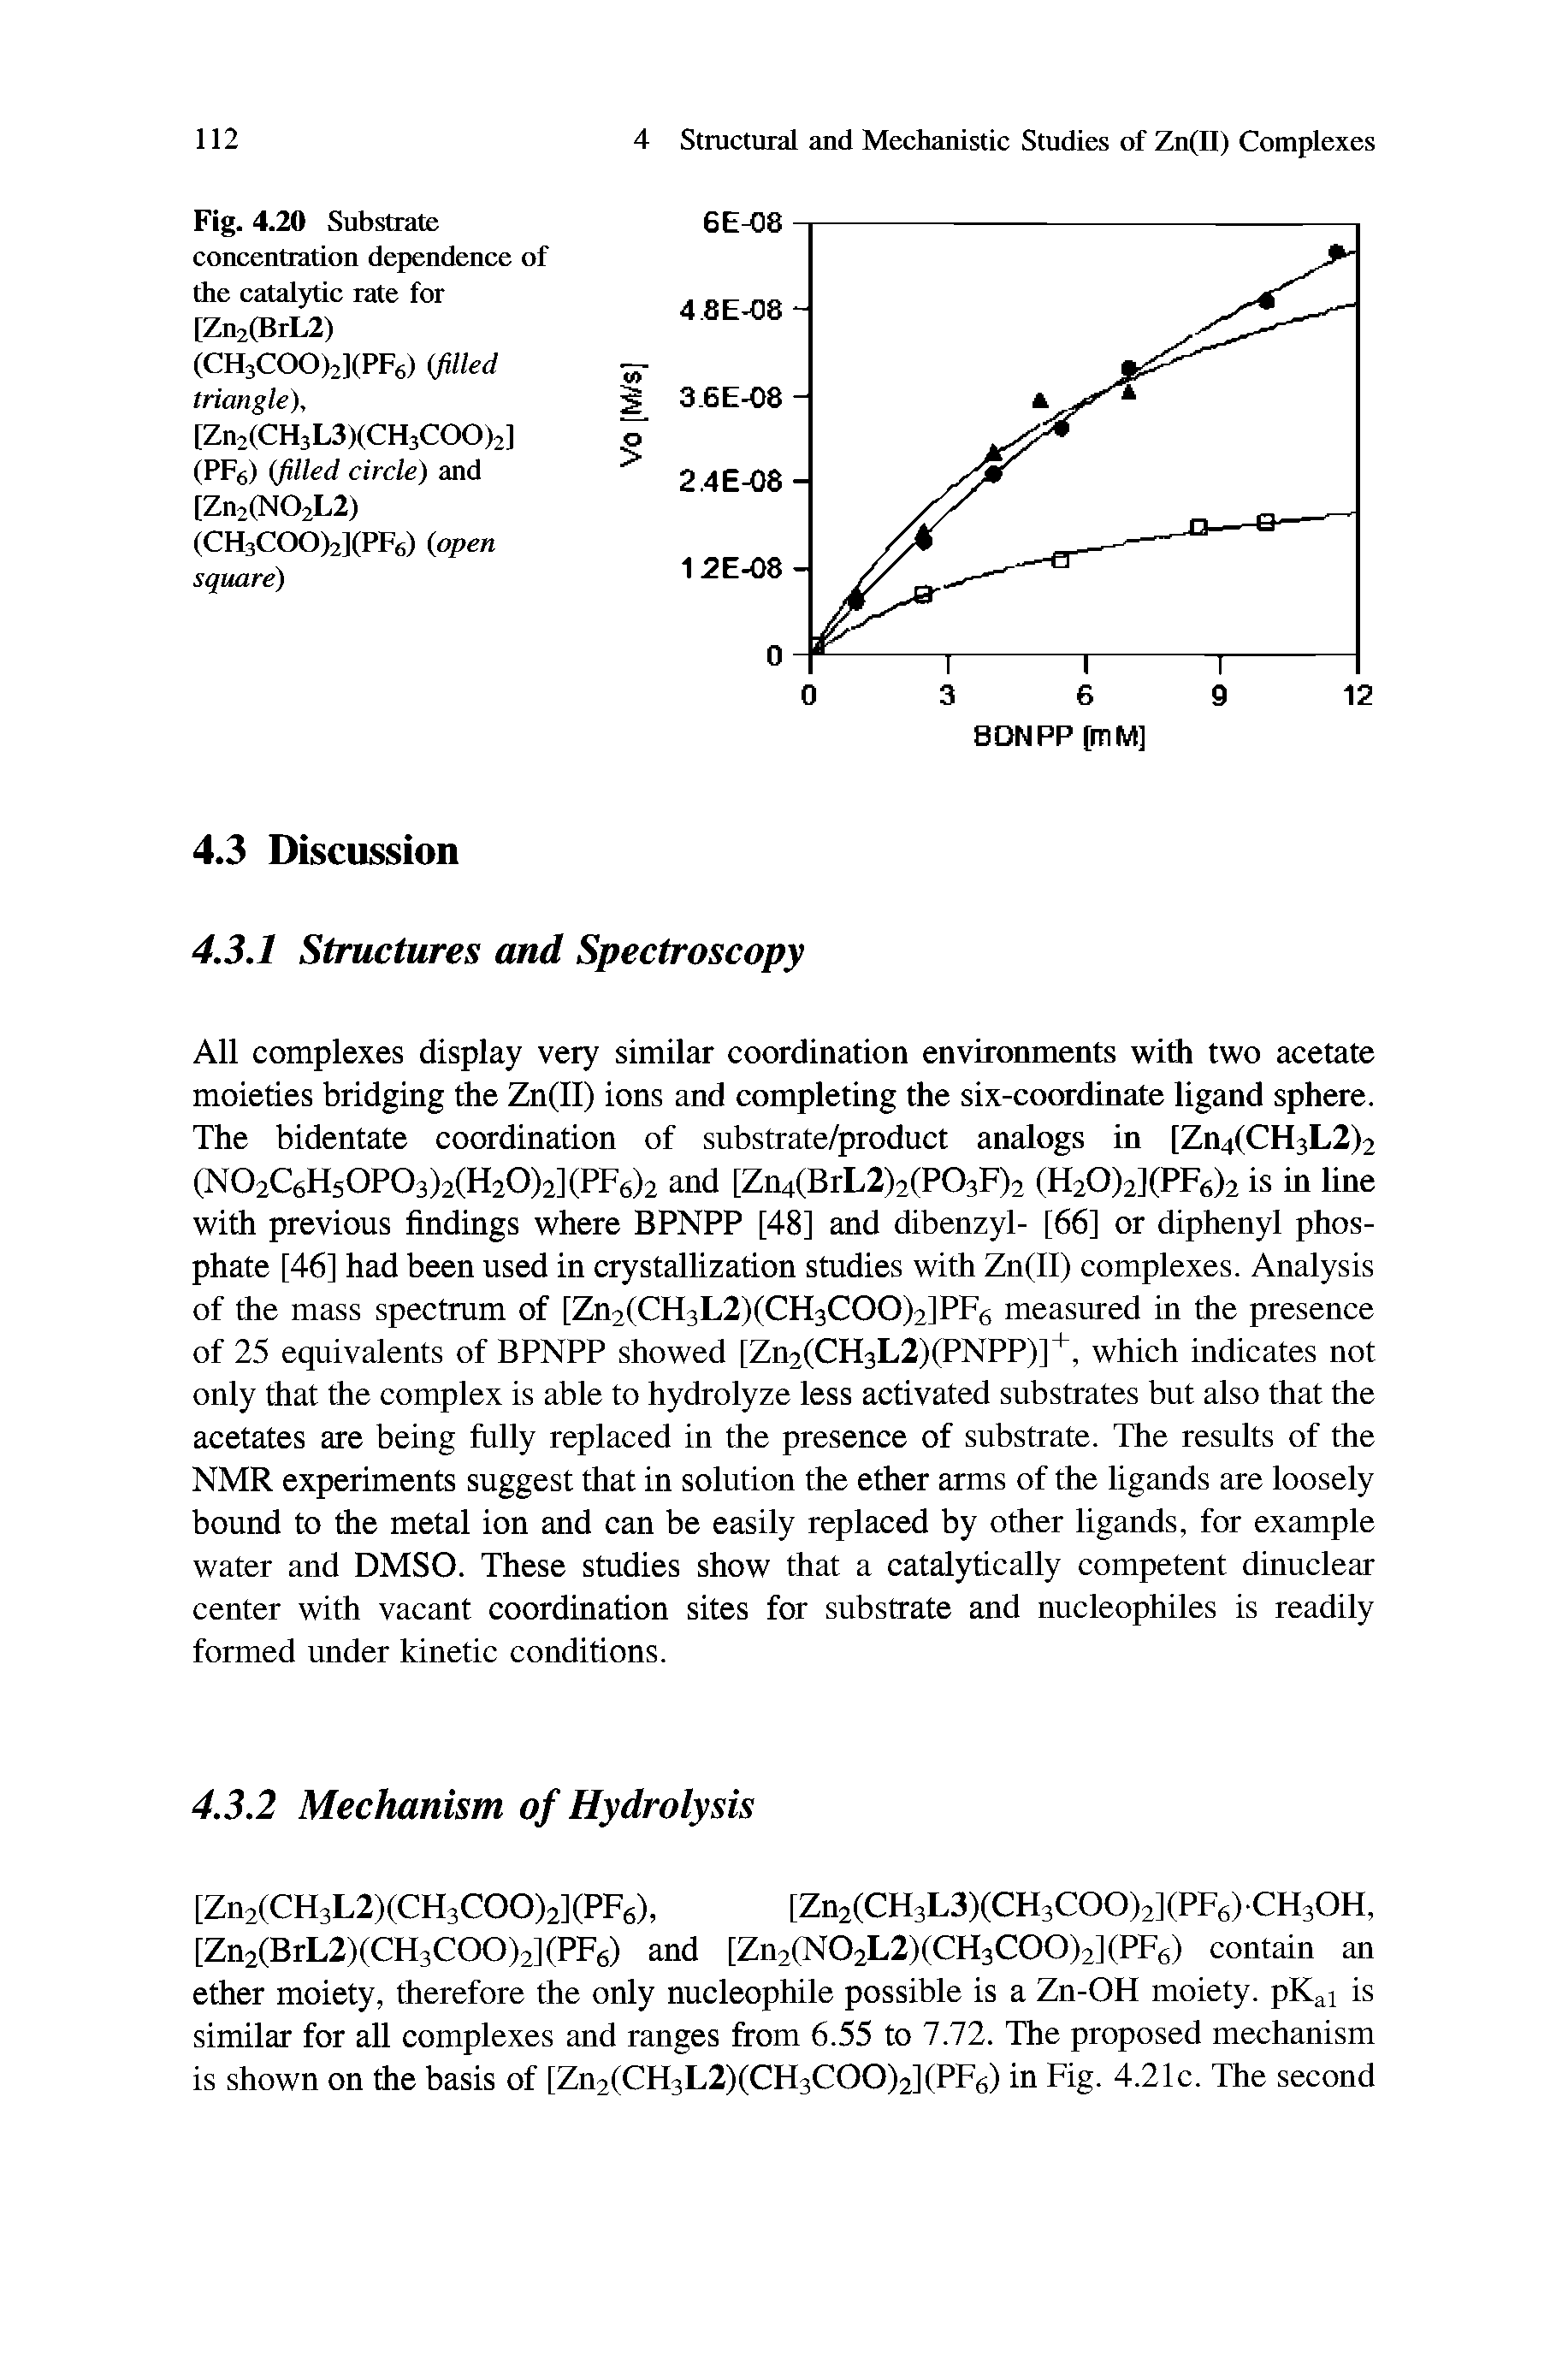 Fig. 4.20 Substrate concentration dependence of the catalytic rate for [Zn2(BrL2)...